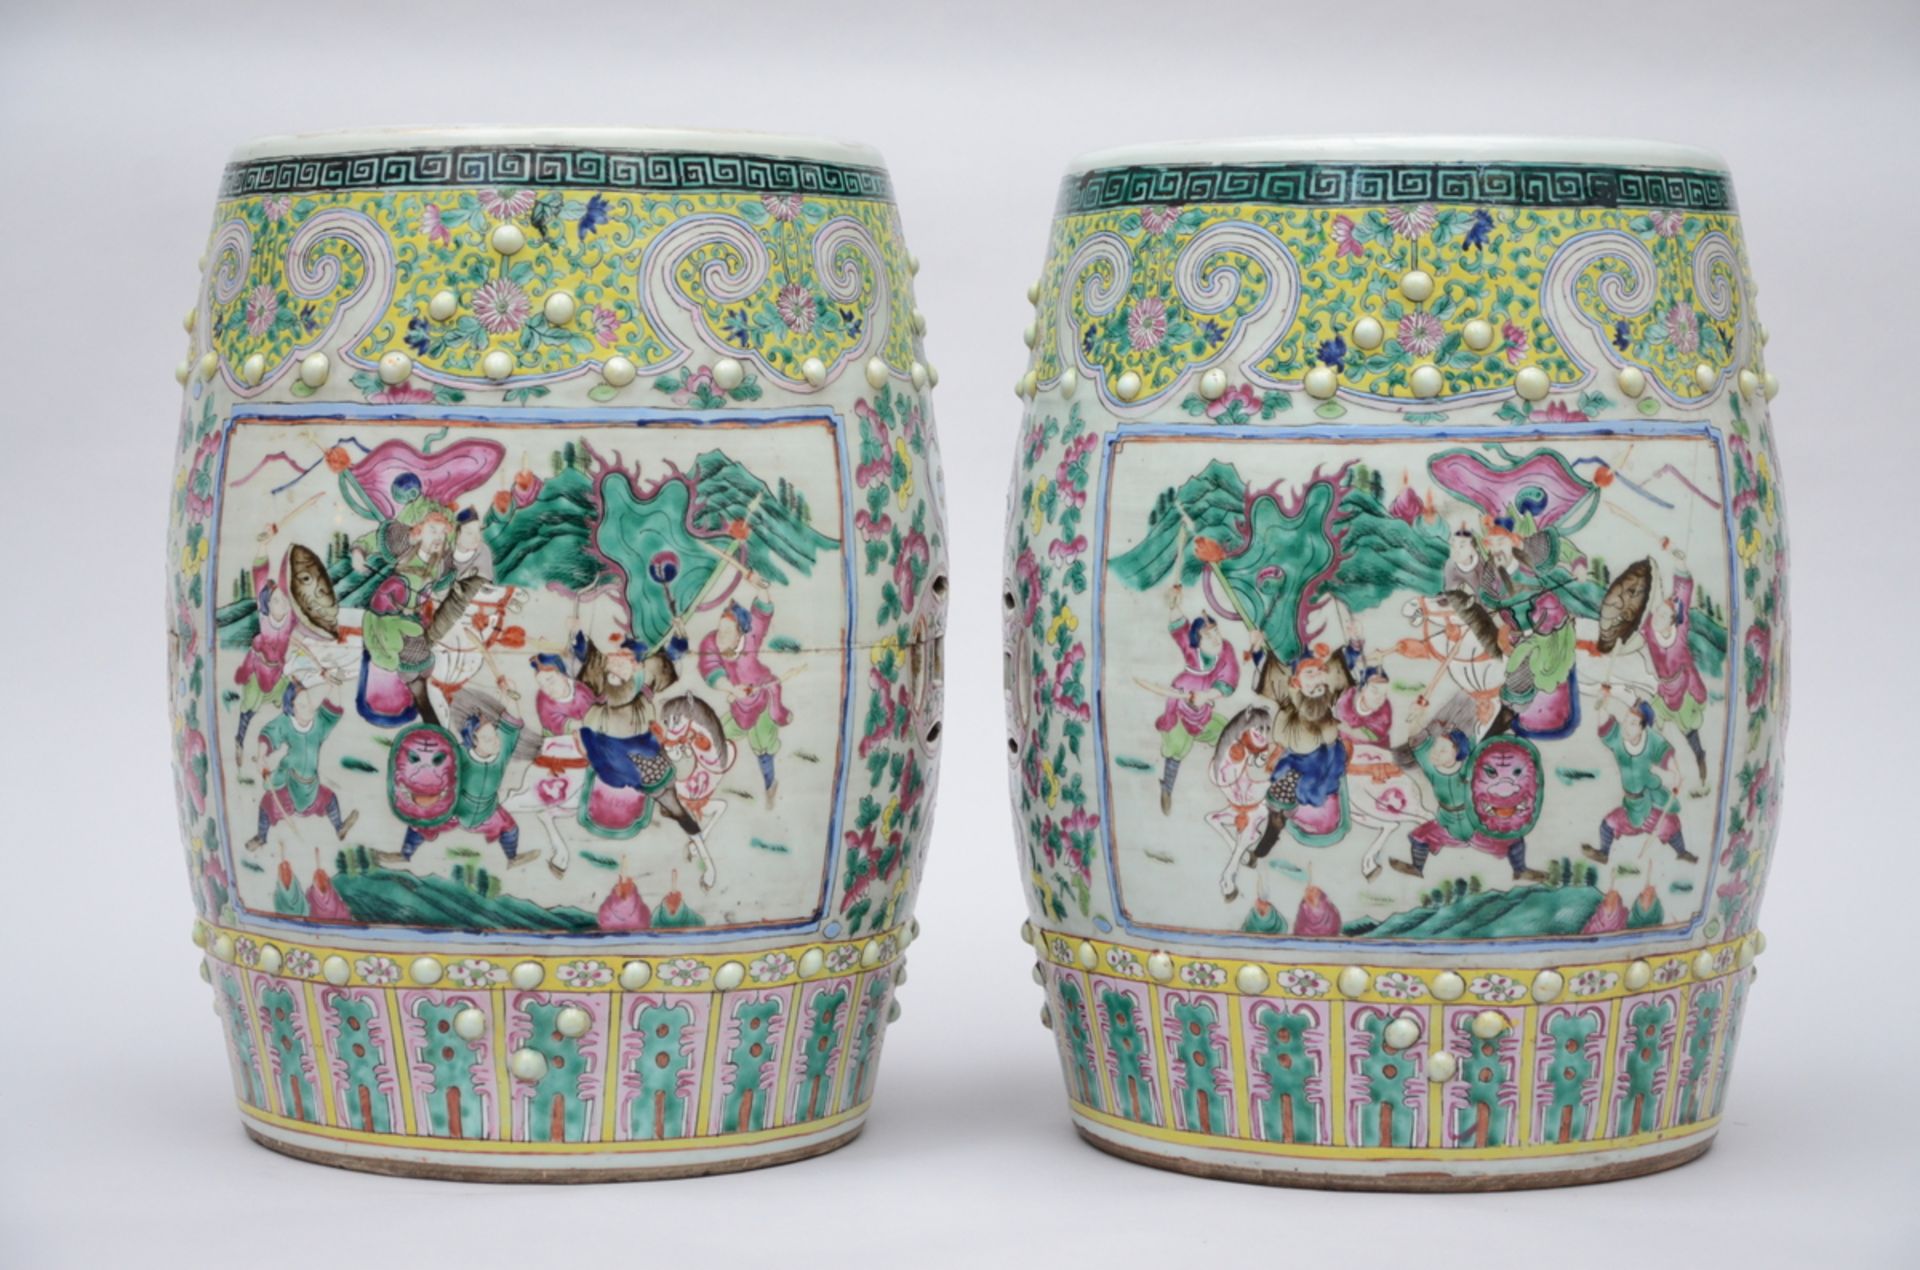 A pair of stools in Chinese famille rose porcelain 'warriors', 19th century (48x32 cm) (*) - Image 2 of 6